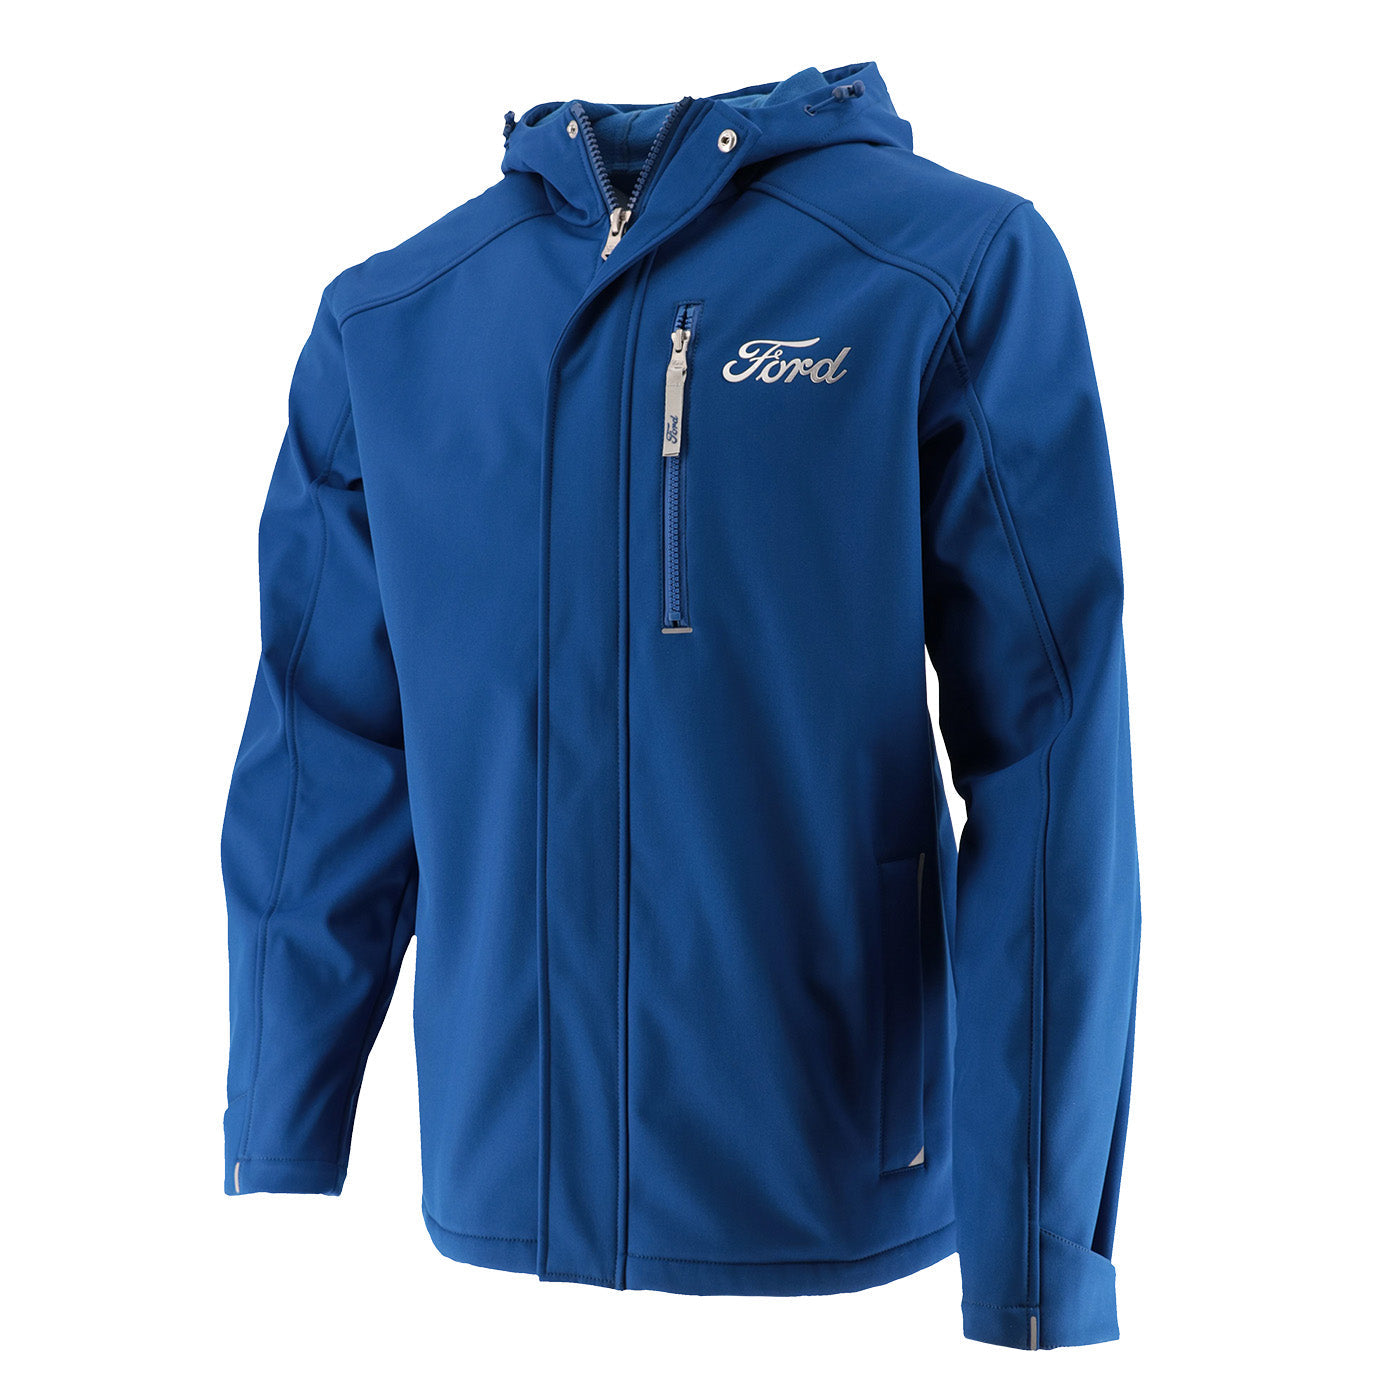 Ford Hooded Jacket- Official Ford Merchandise